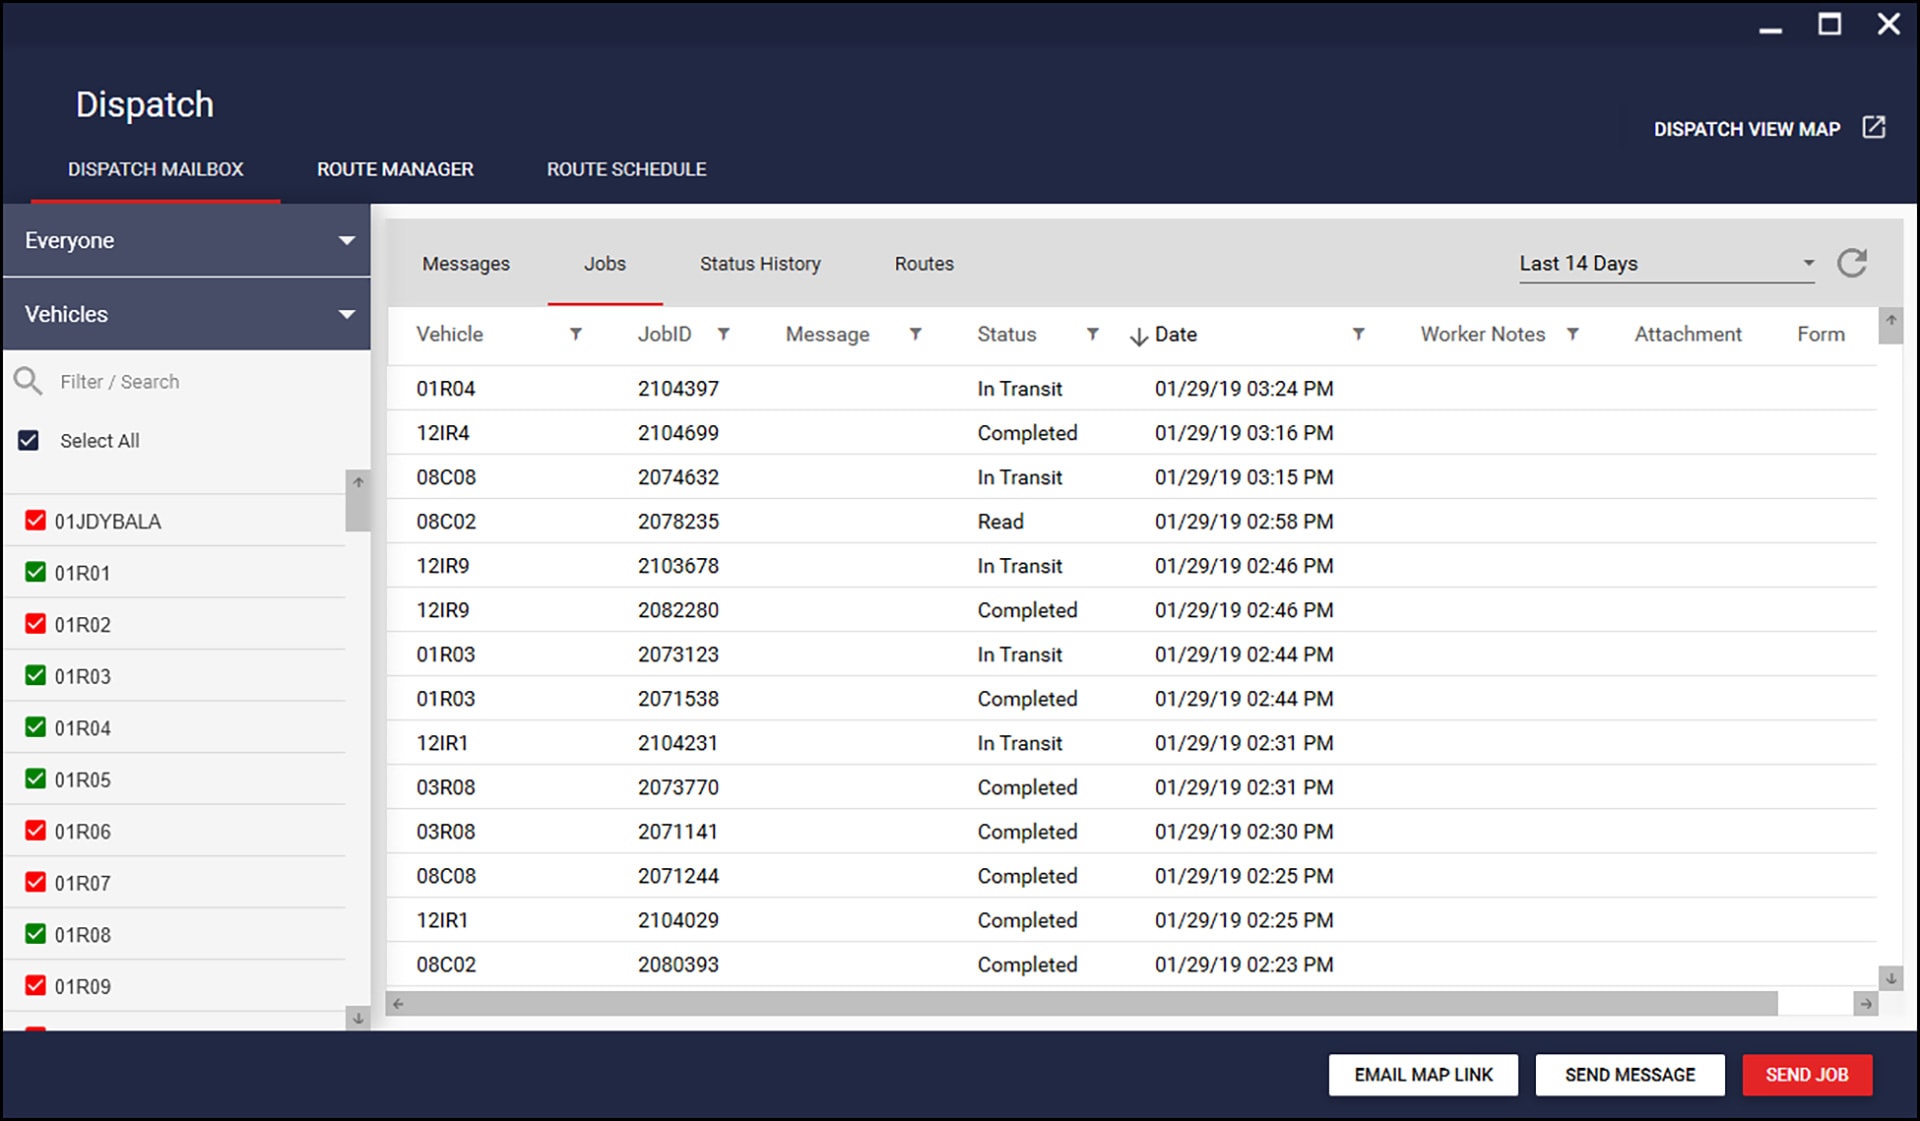 StreetEagle’s special trades fleet management platform includes access to the dispatch module